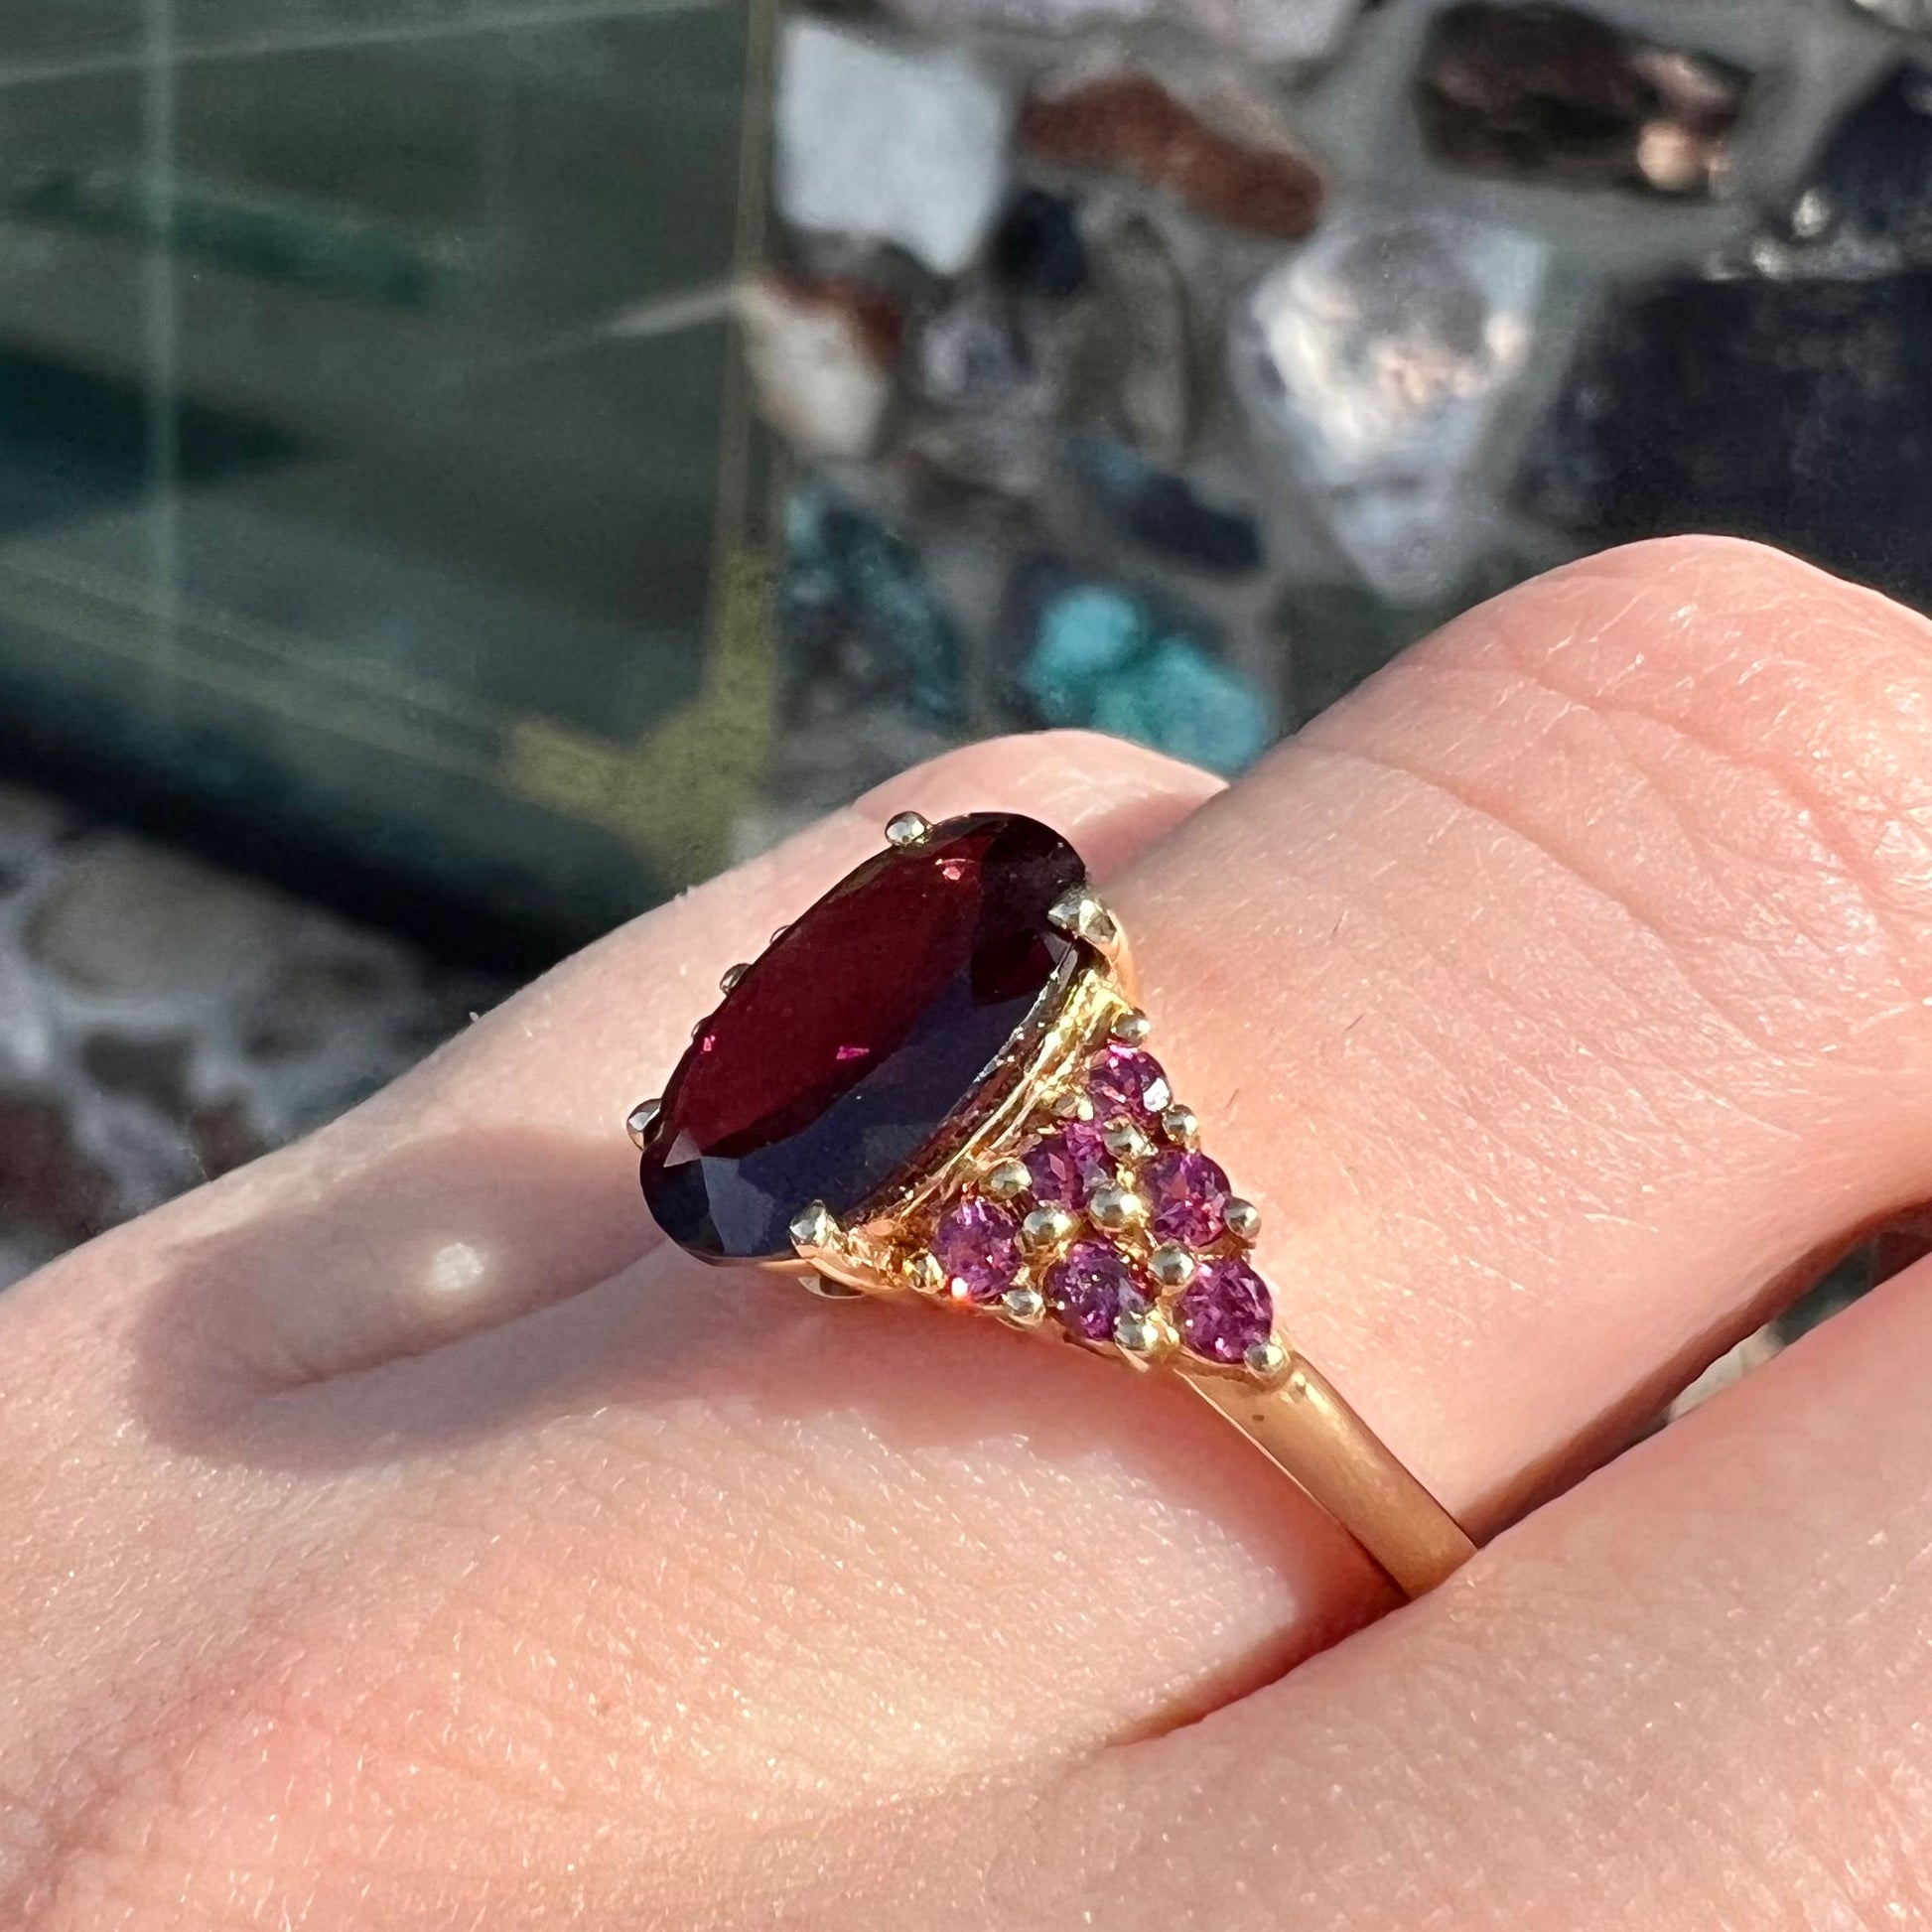 A ring with a crimson reddish purple stone set with clusters of round purple garnets on each side.